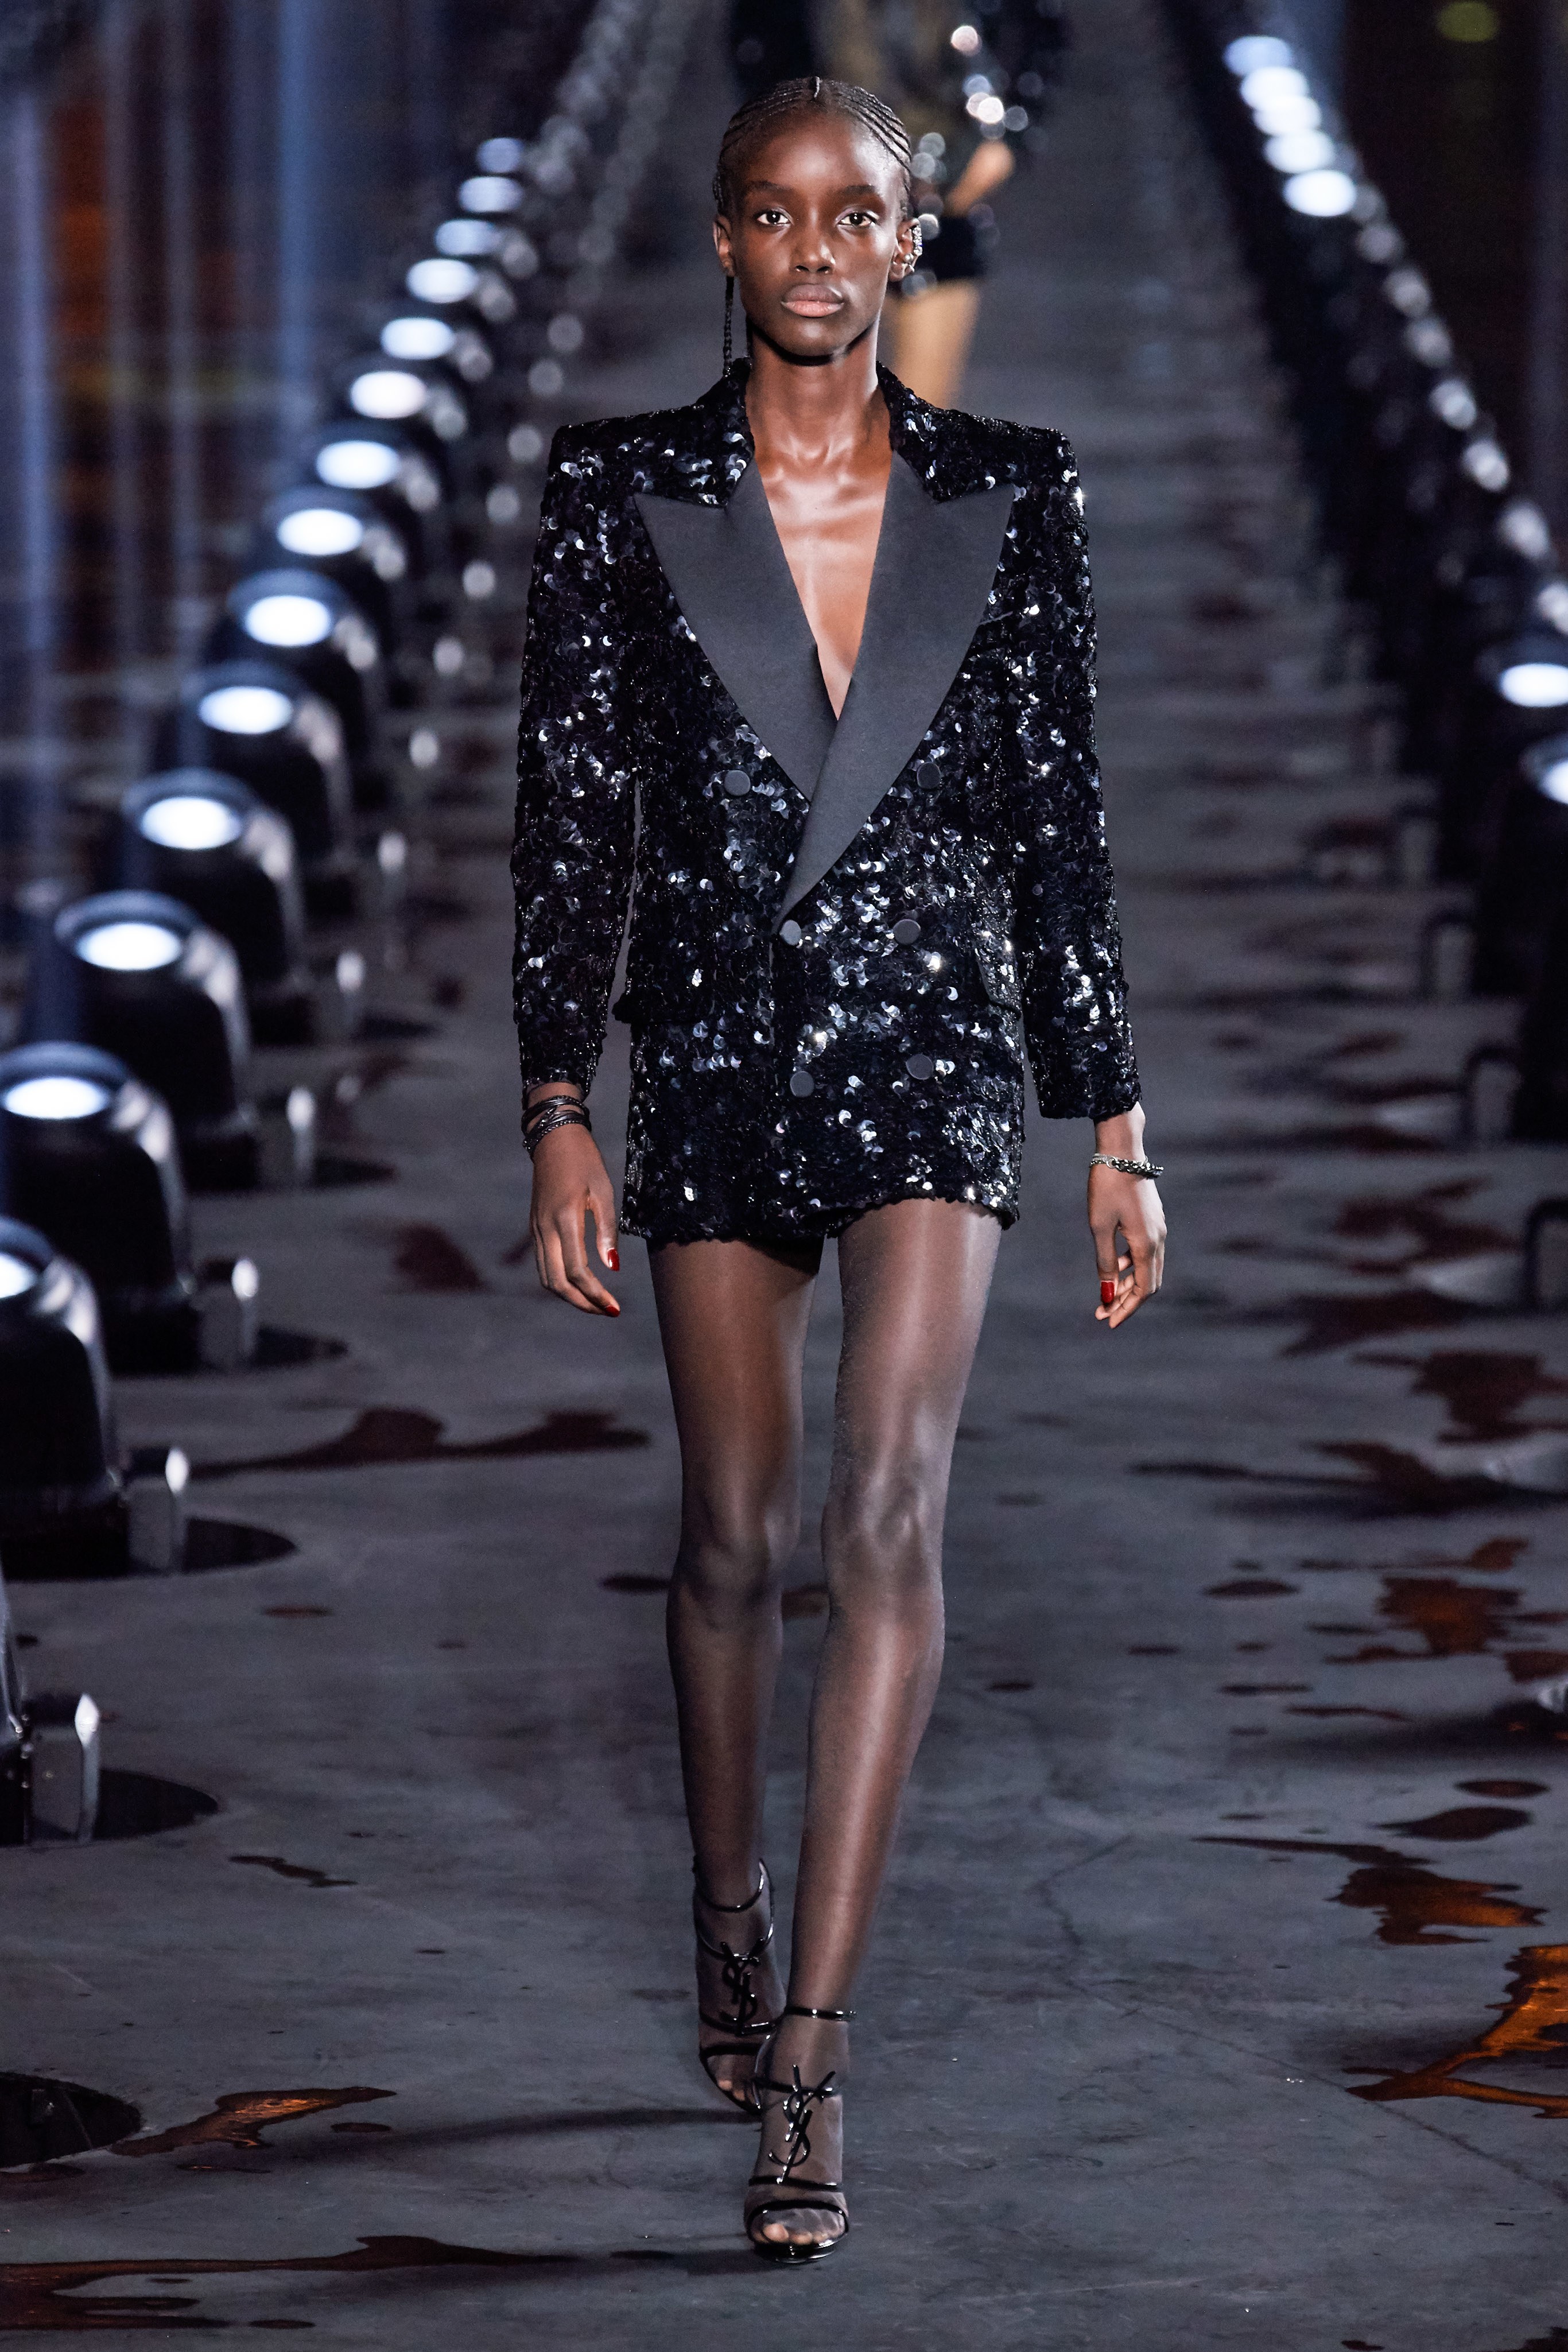 Saint Laurent Spring 2020 ready-to-wear